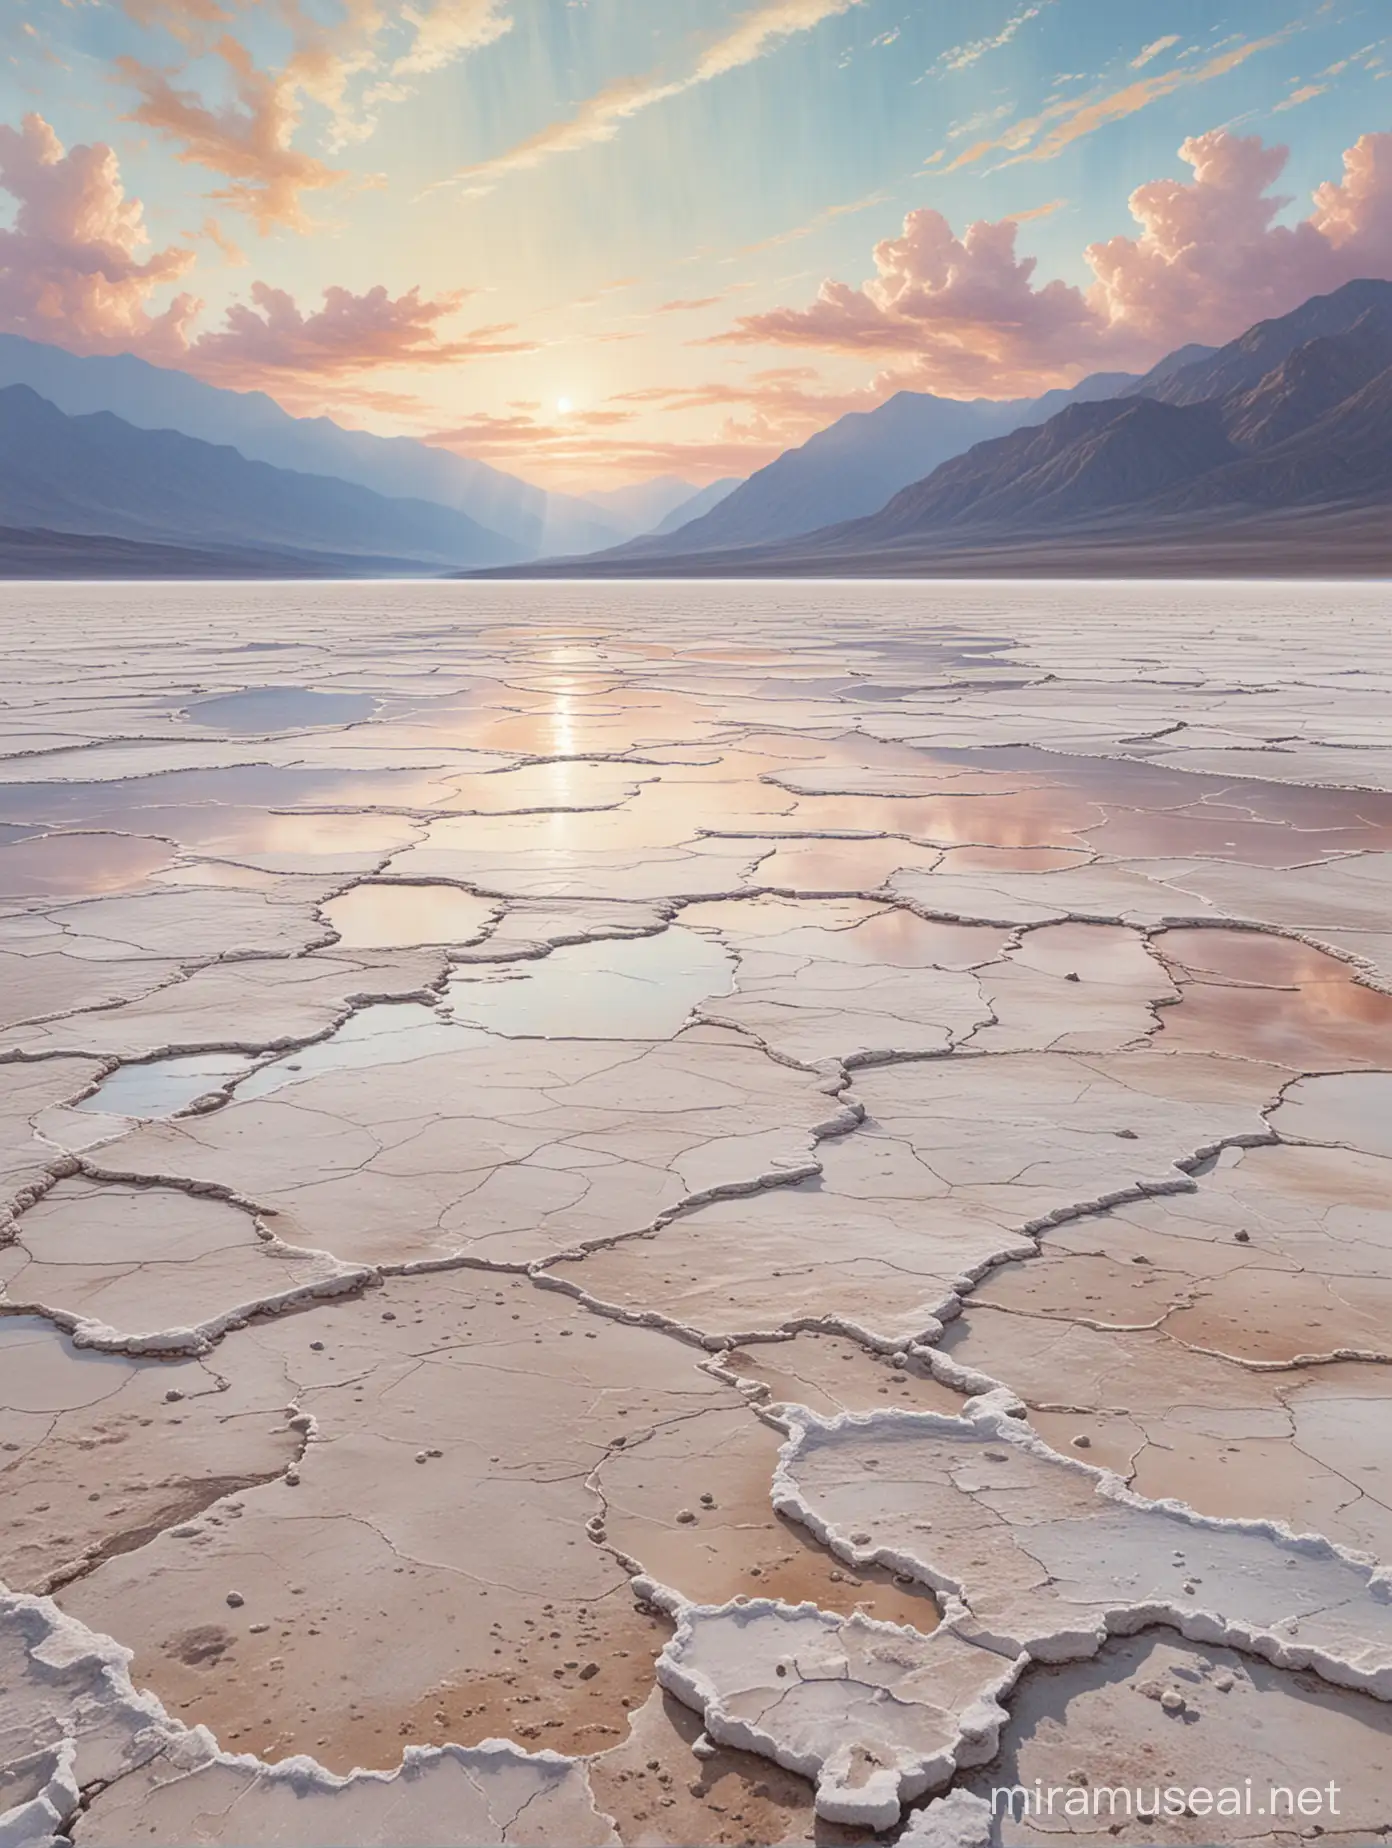 Panoramic View of Badwater Basin with Dramatic Clouds in Muted Pastel Colors